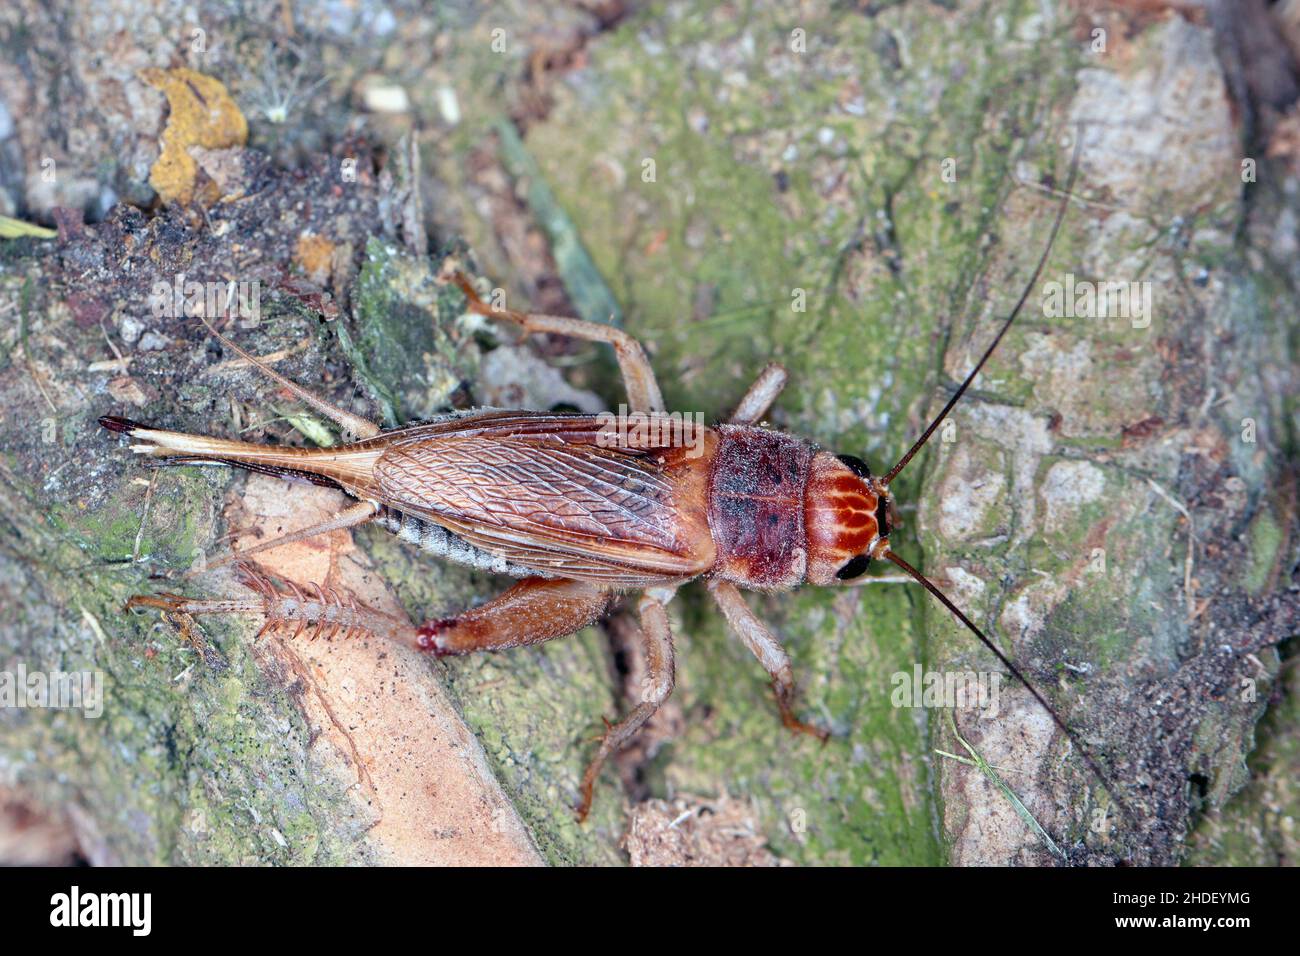 Close up House cricket (Acheta domestica). The pest is often found in homes. Stock Photo